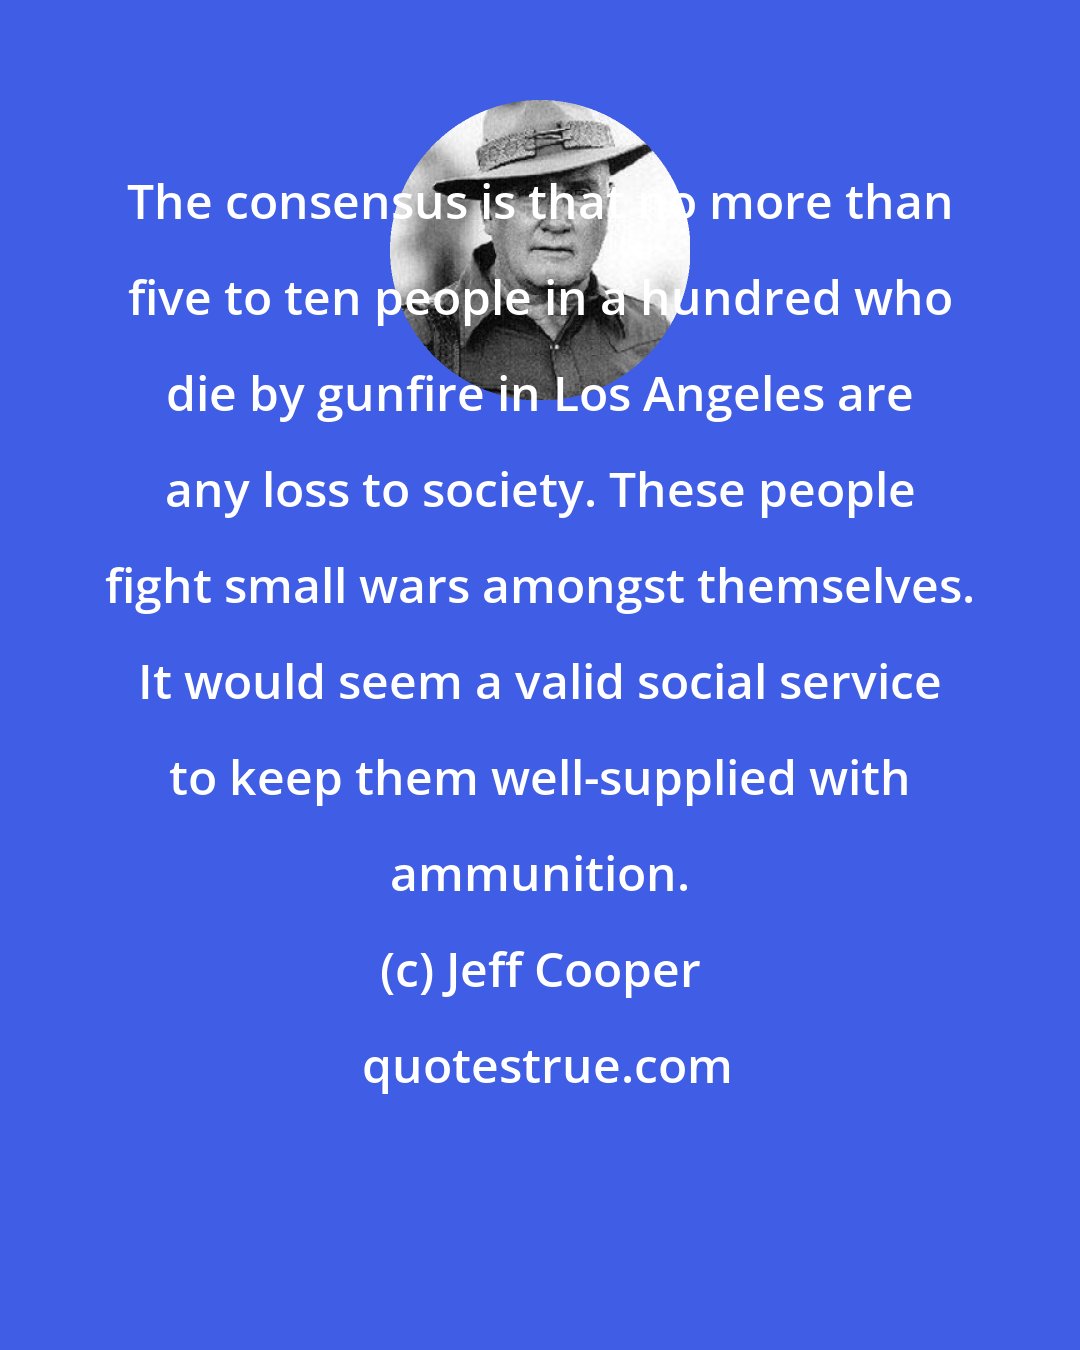 Jeff Cooper: The consensus is that no more than five to ten people in a hundred who die by gunfire in Los Angeles are any loss to society. These people fight small wars amongst themselves. It would seem a valid social service to keep them well-supplied with ammunition.